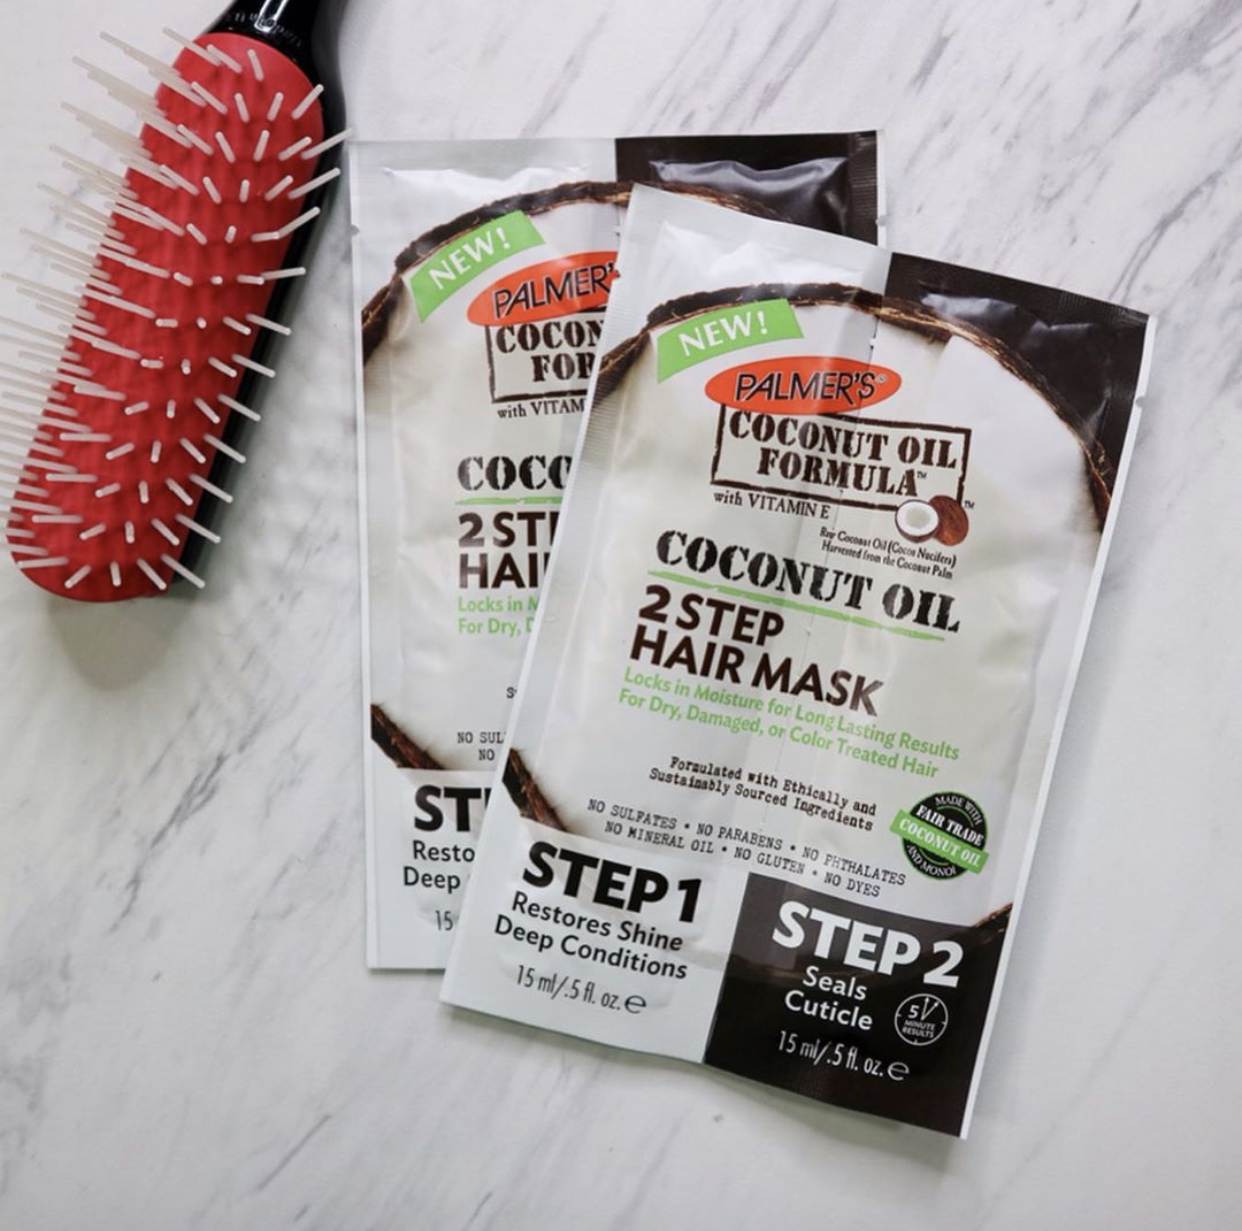 Palmer's Coconut Oil Formula 2 Step Hair Mask for dry hair on table with brush